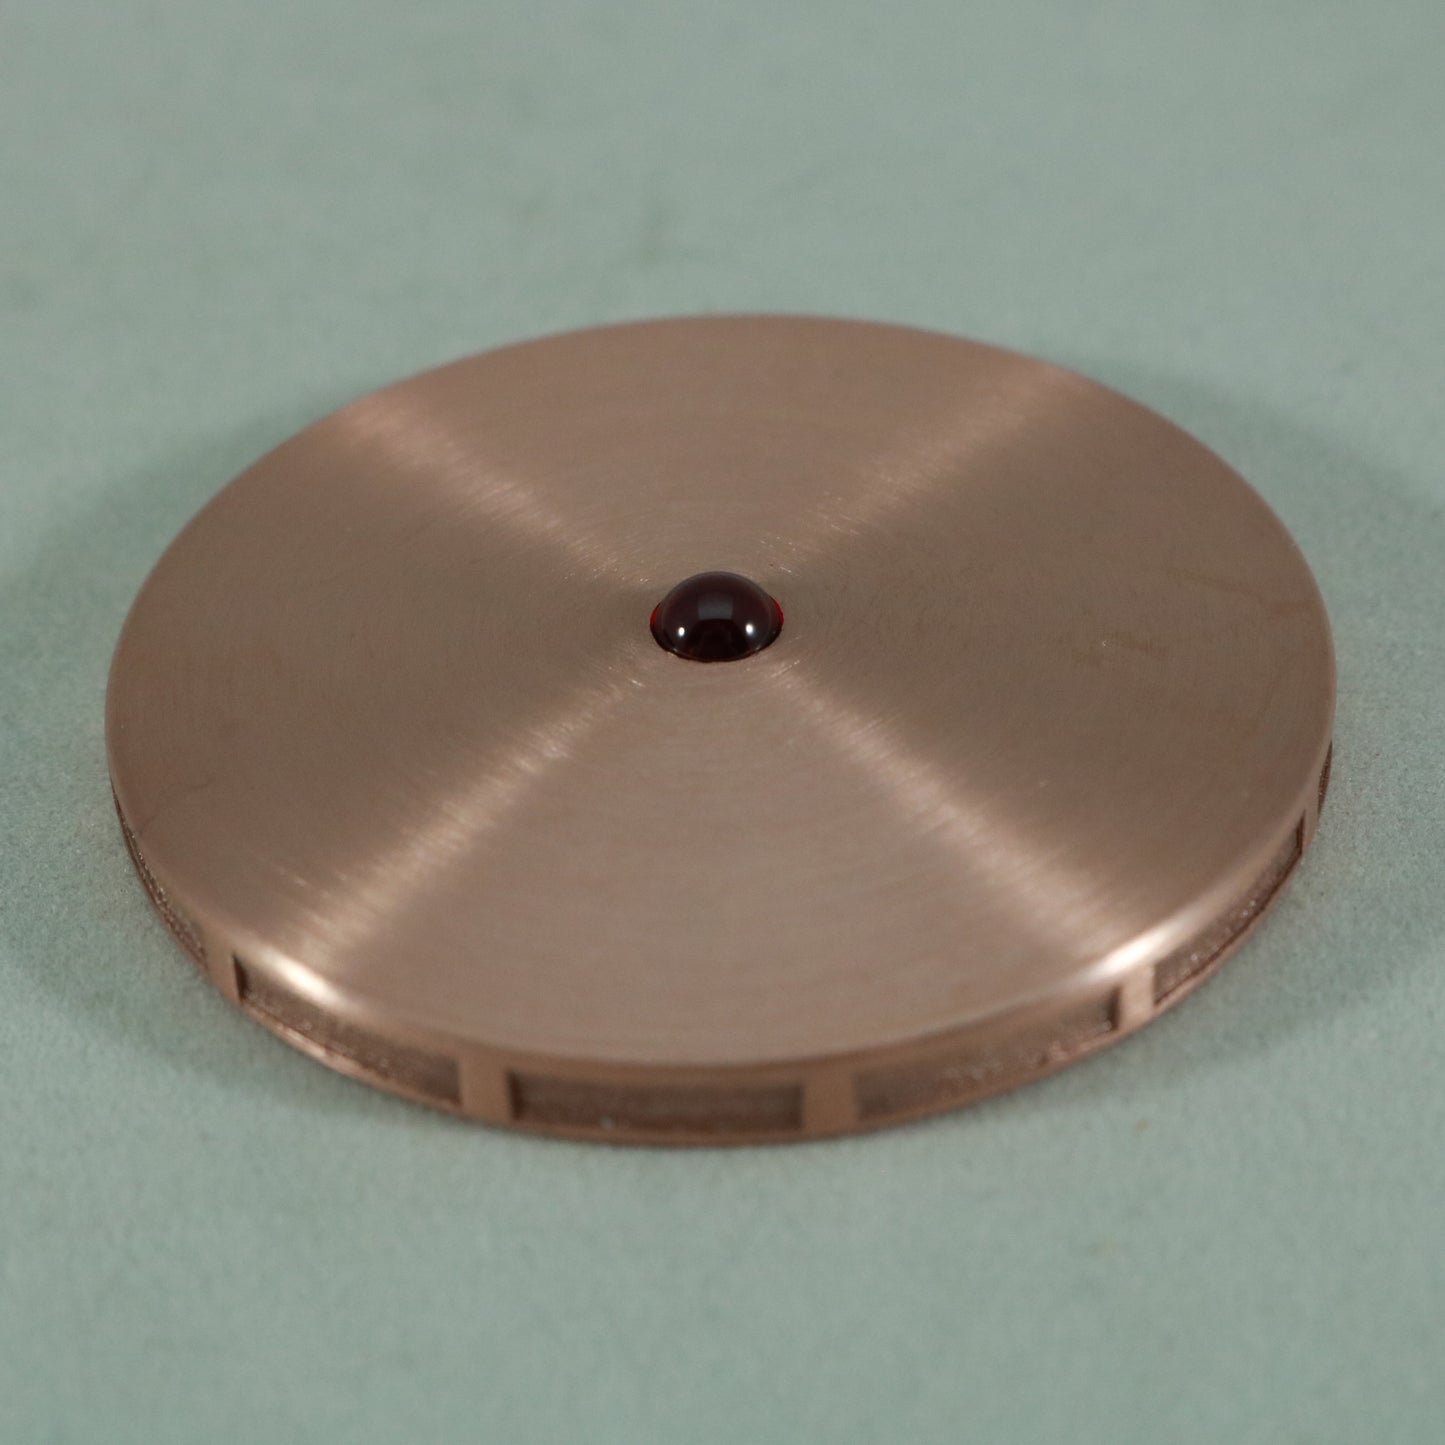 Mechanical Typhoon Spinning Coin - Ruby Bearing